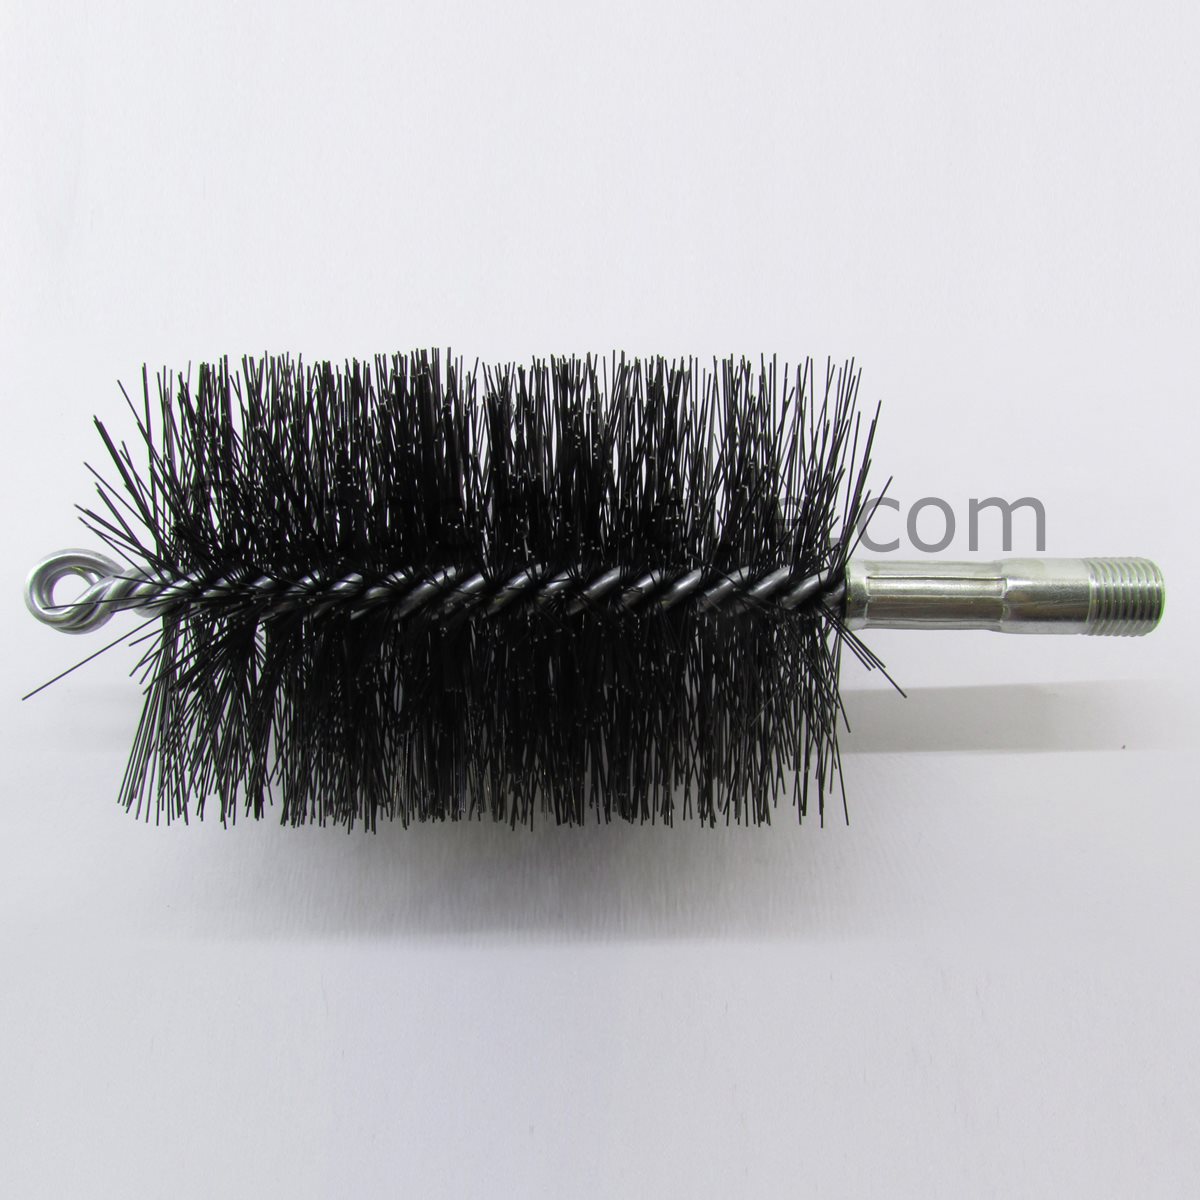 3'' DOUBLE SPIRAL BRUSH